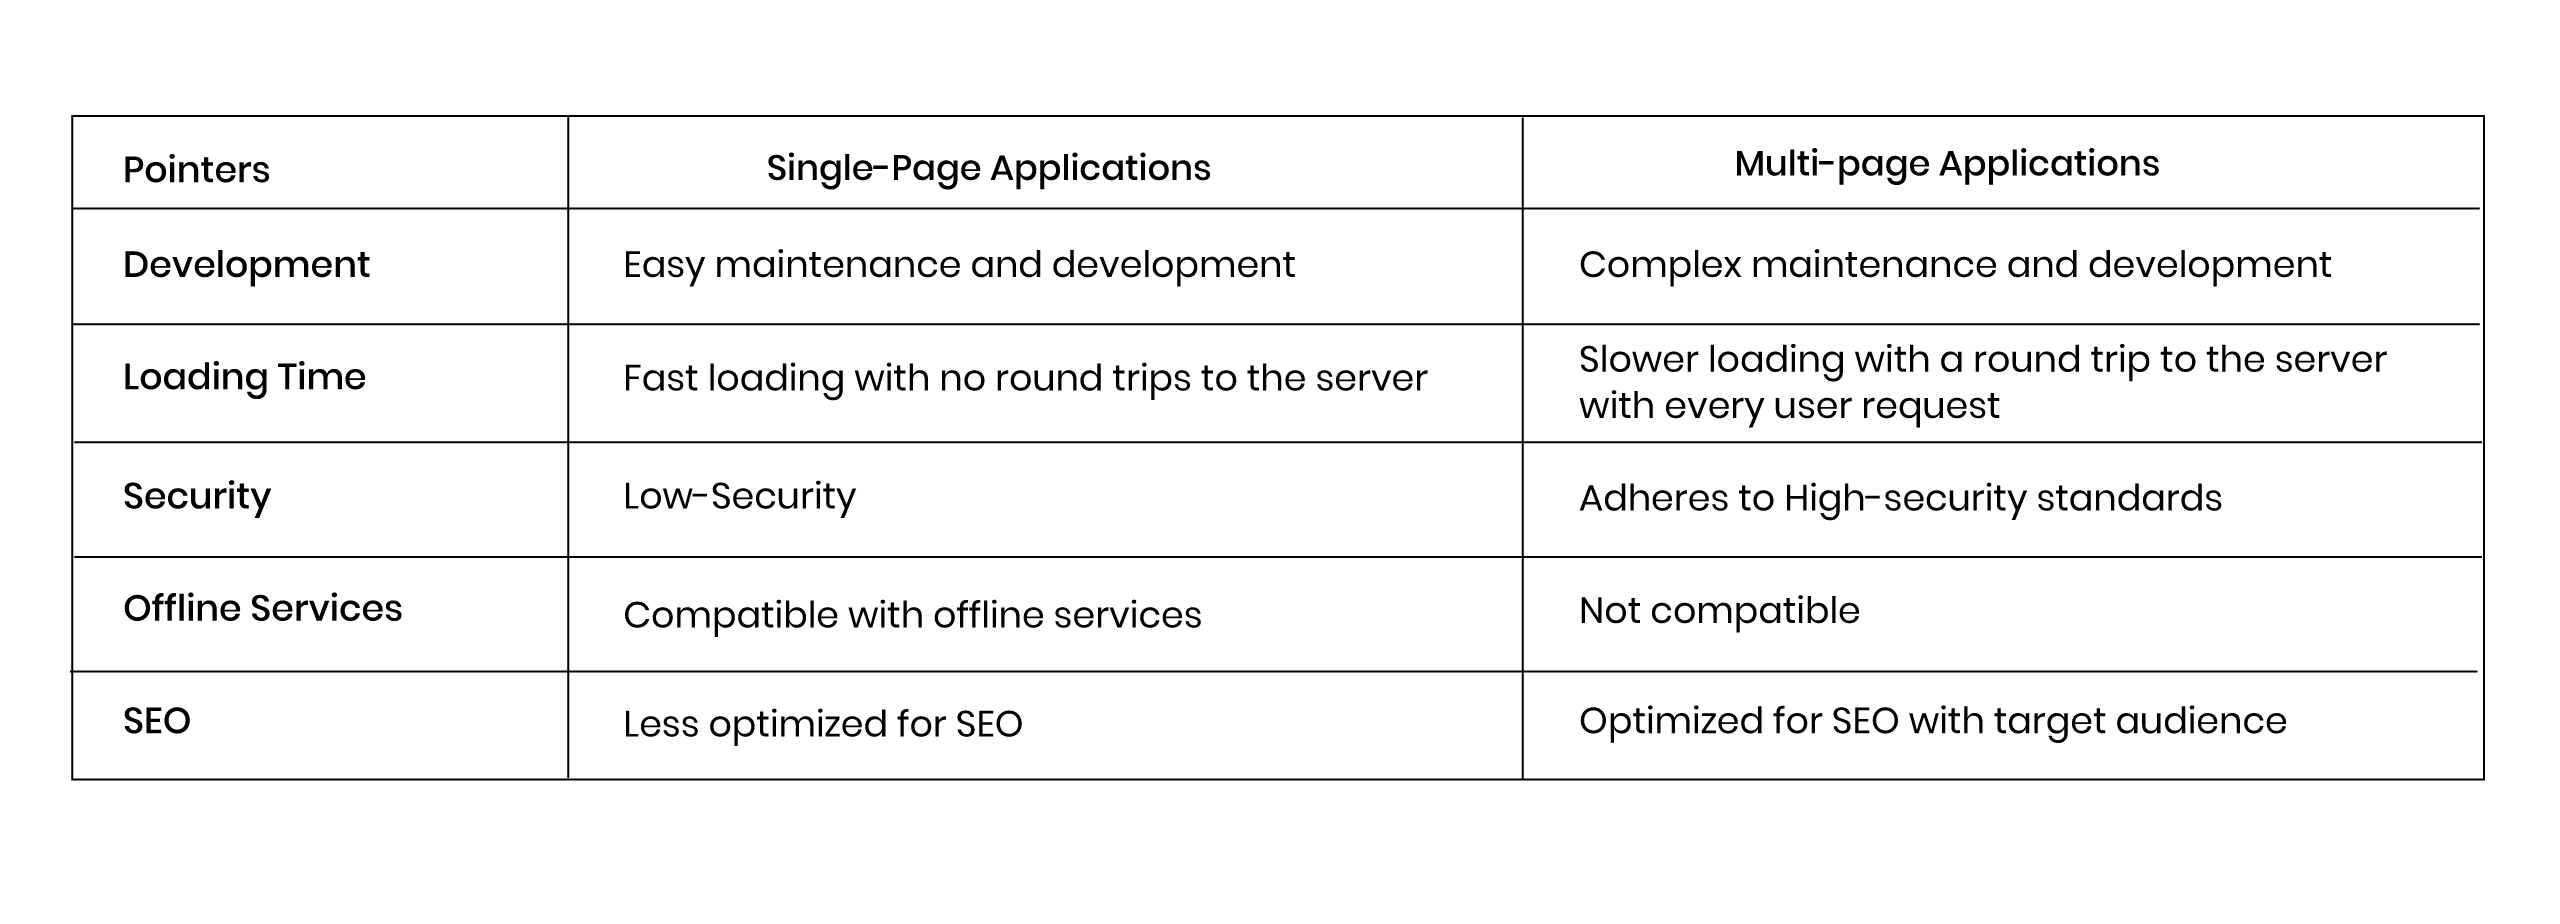 single-page and multi-page applications